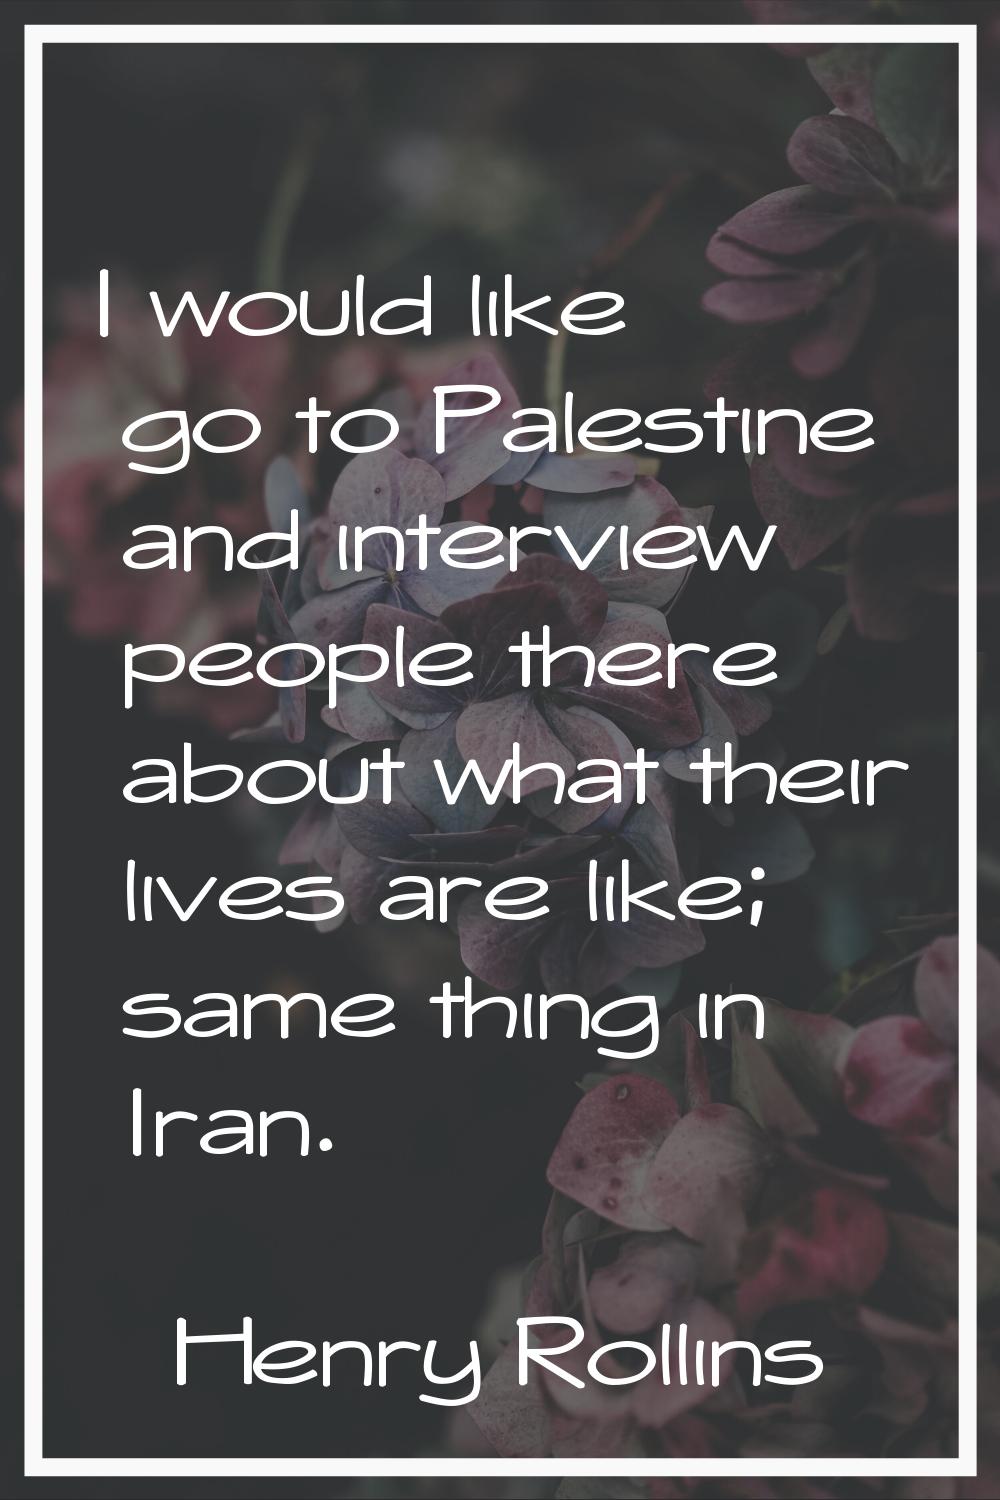 I would like go to Palestine and interview people there about what their lives are like; same thing